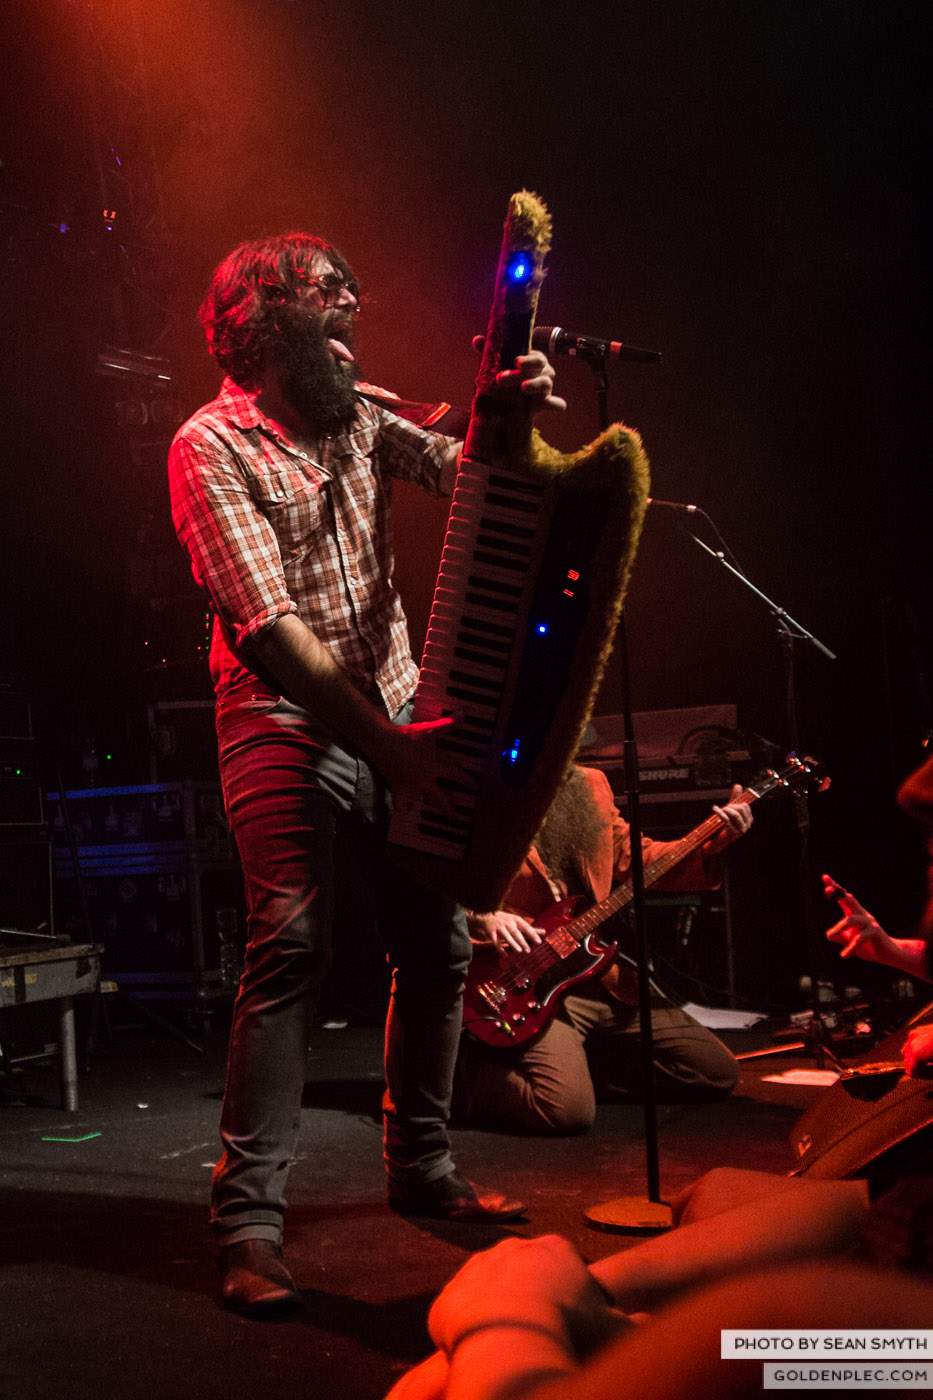 the-beards-at-button-factory-by-sean-smyth-10-12-14-41-of-49